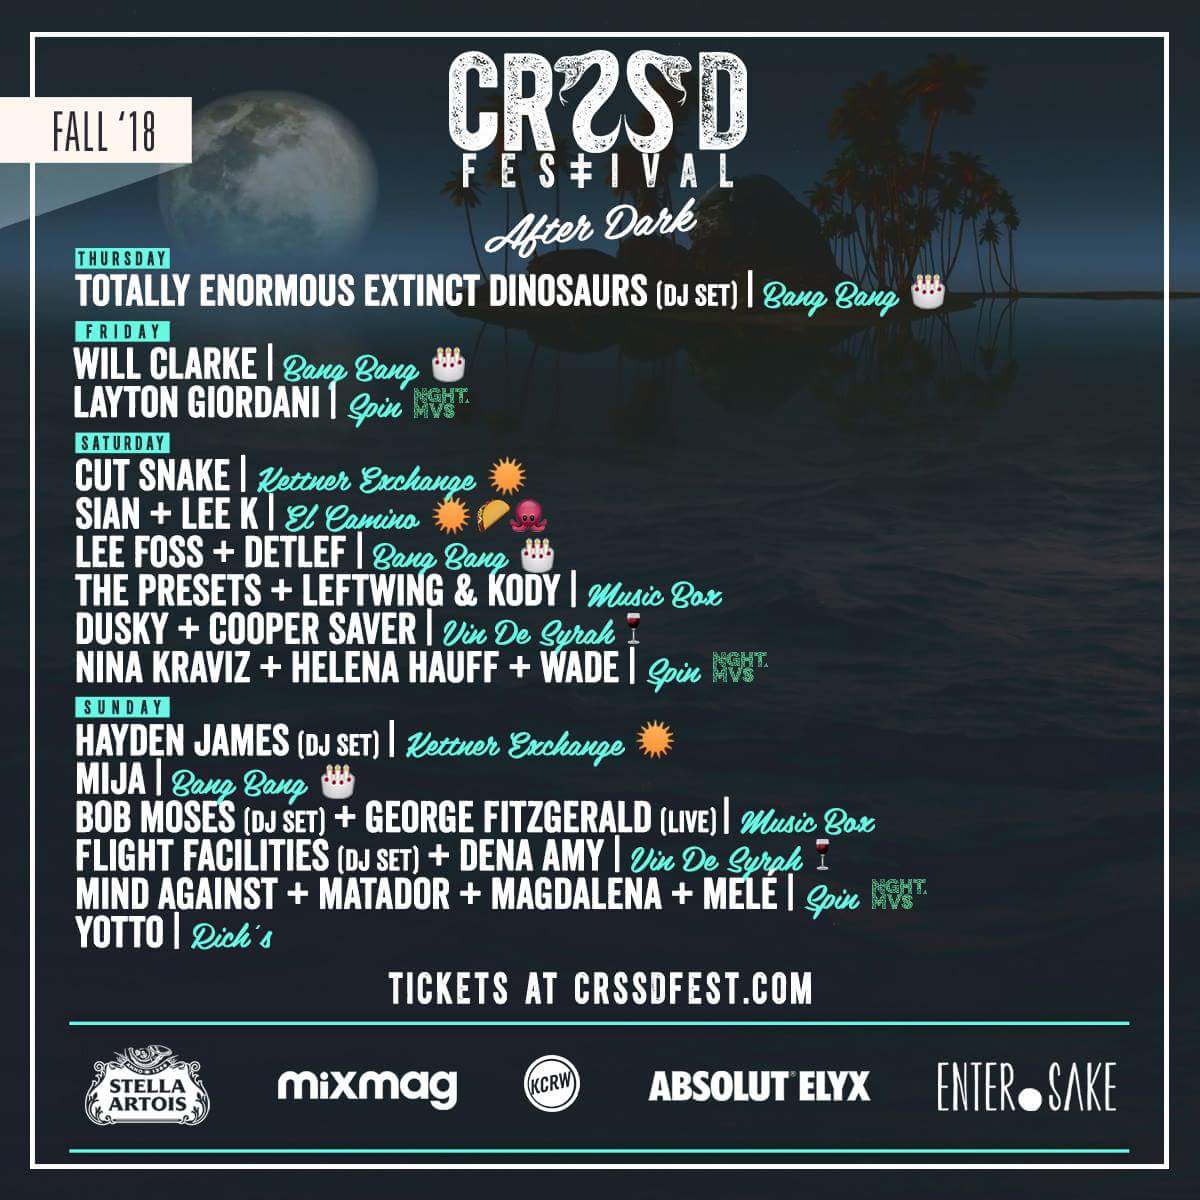 CRSSD By Day After Dark Fall 2018